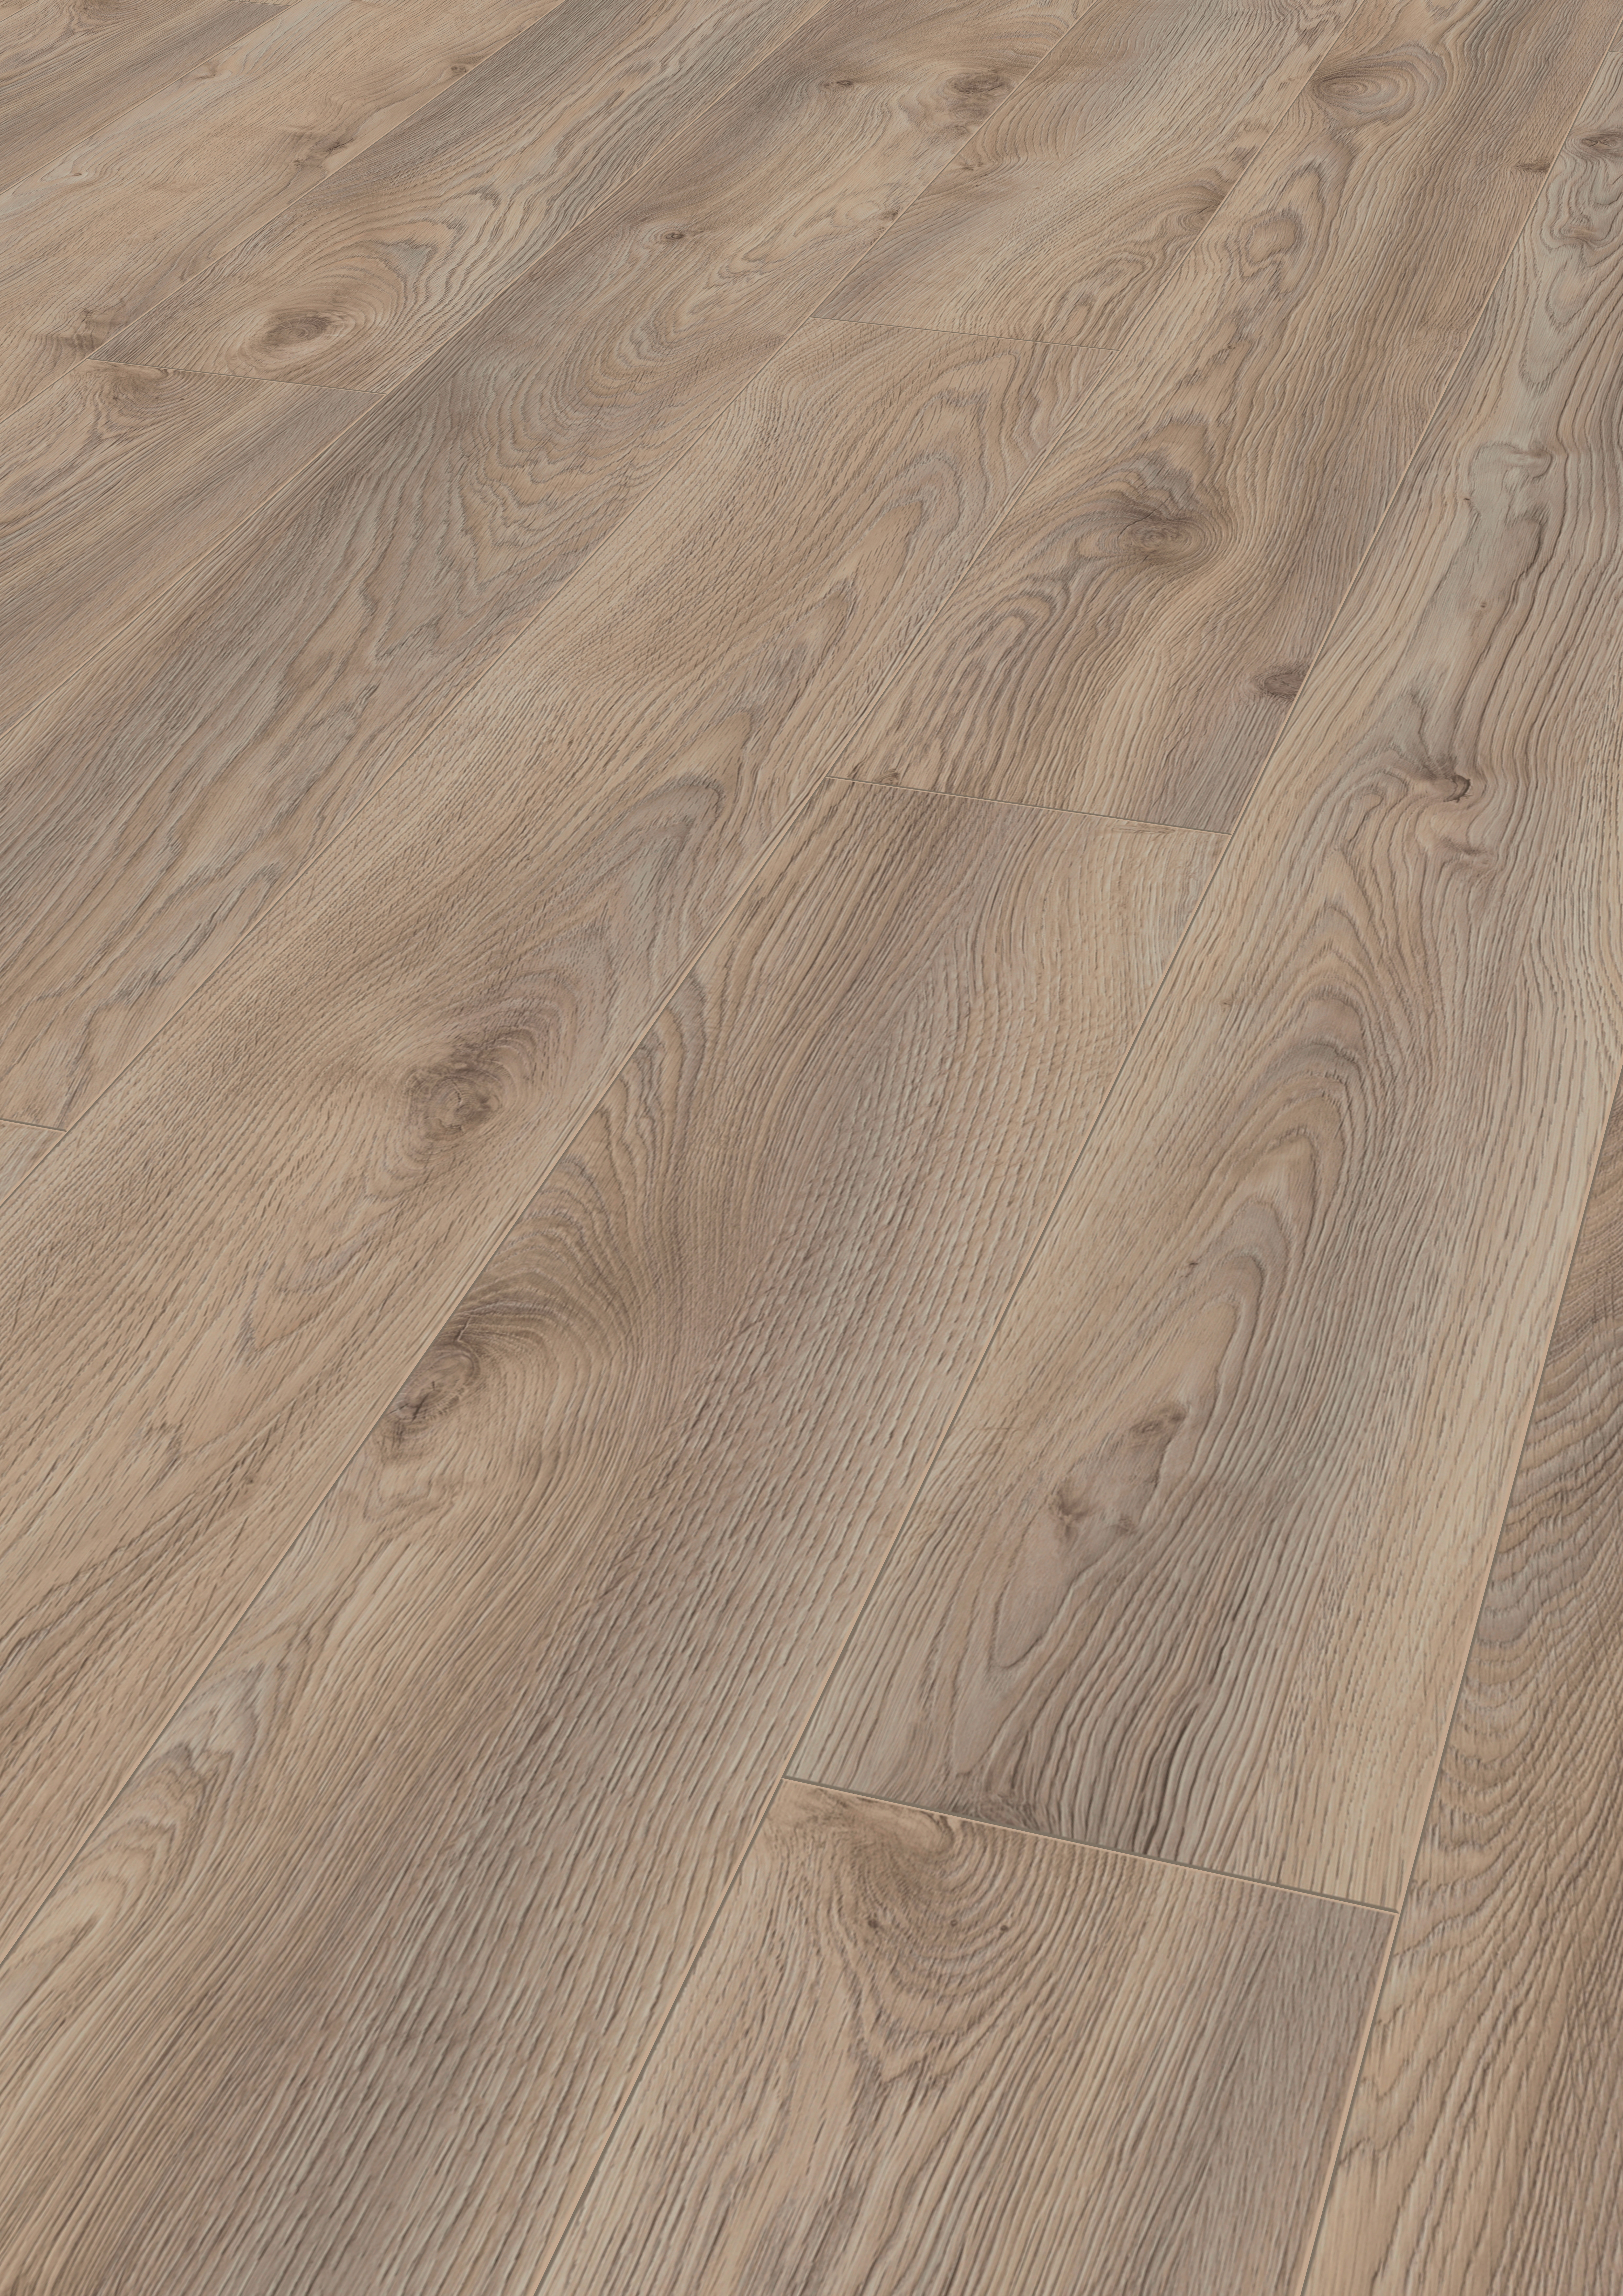 Titan Hardwood Flooring Canada Of Mammut Laminate Flooring In Country House Plank Style Kronotex within Download Picture Amp